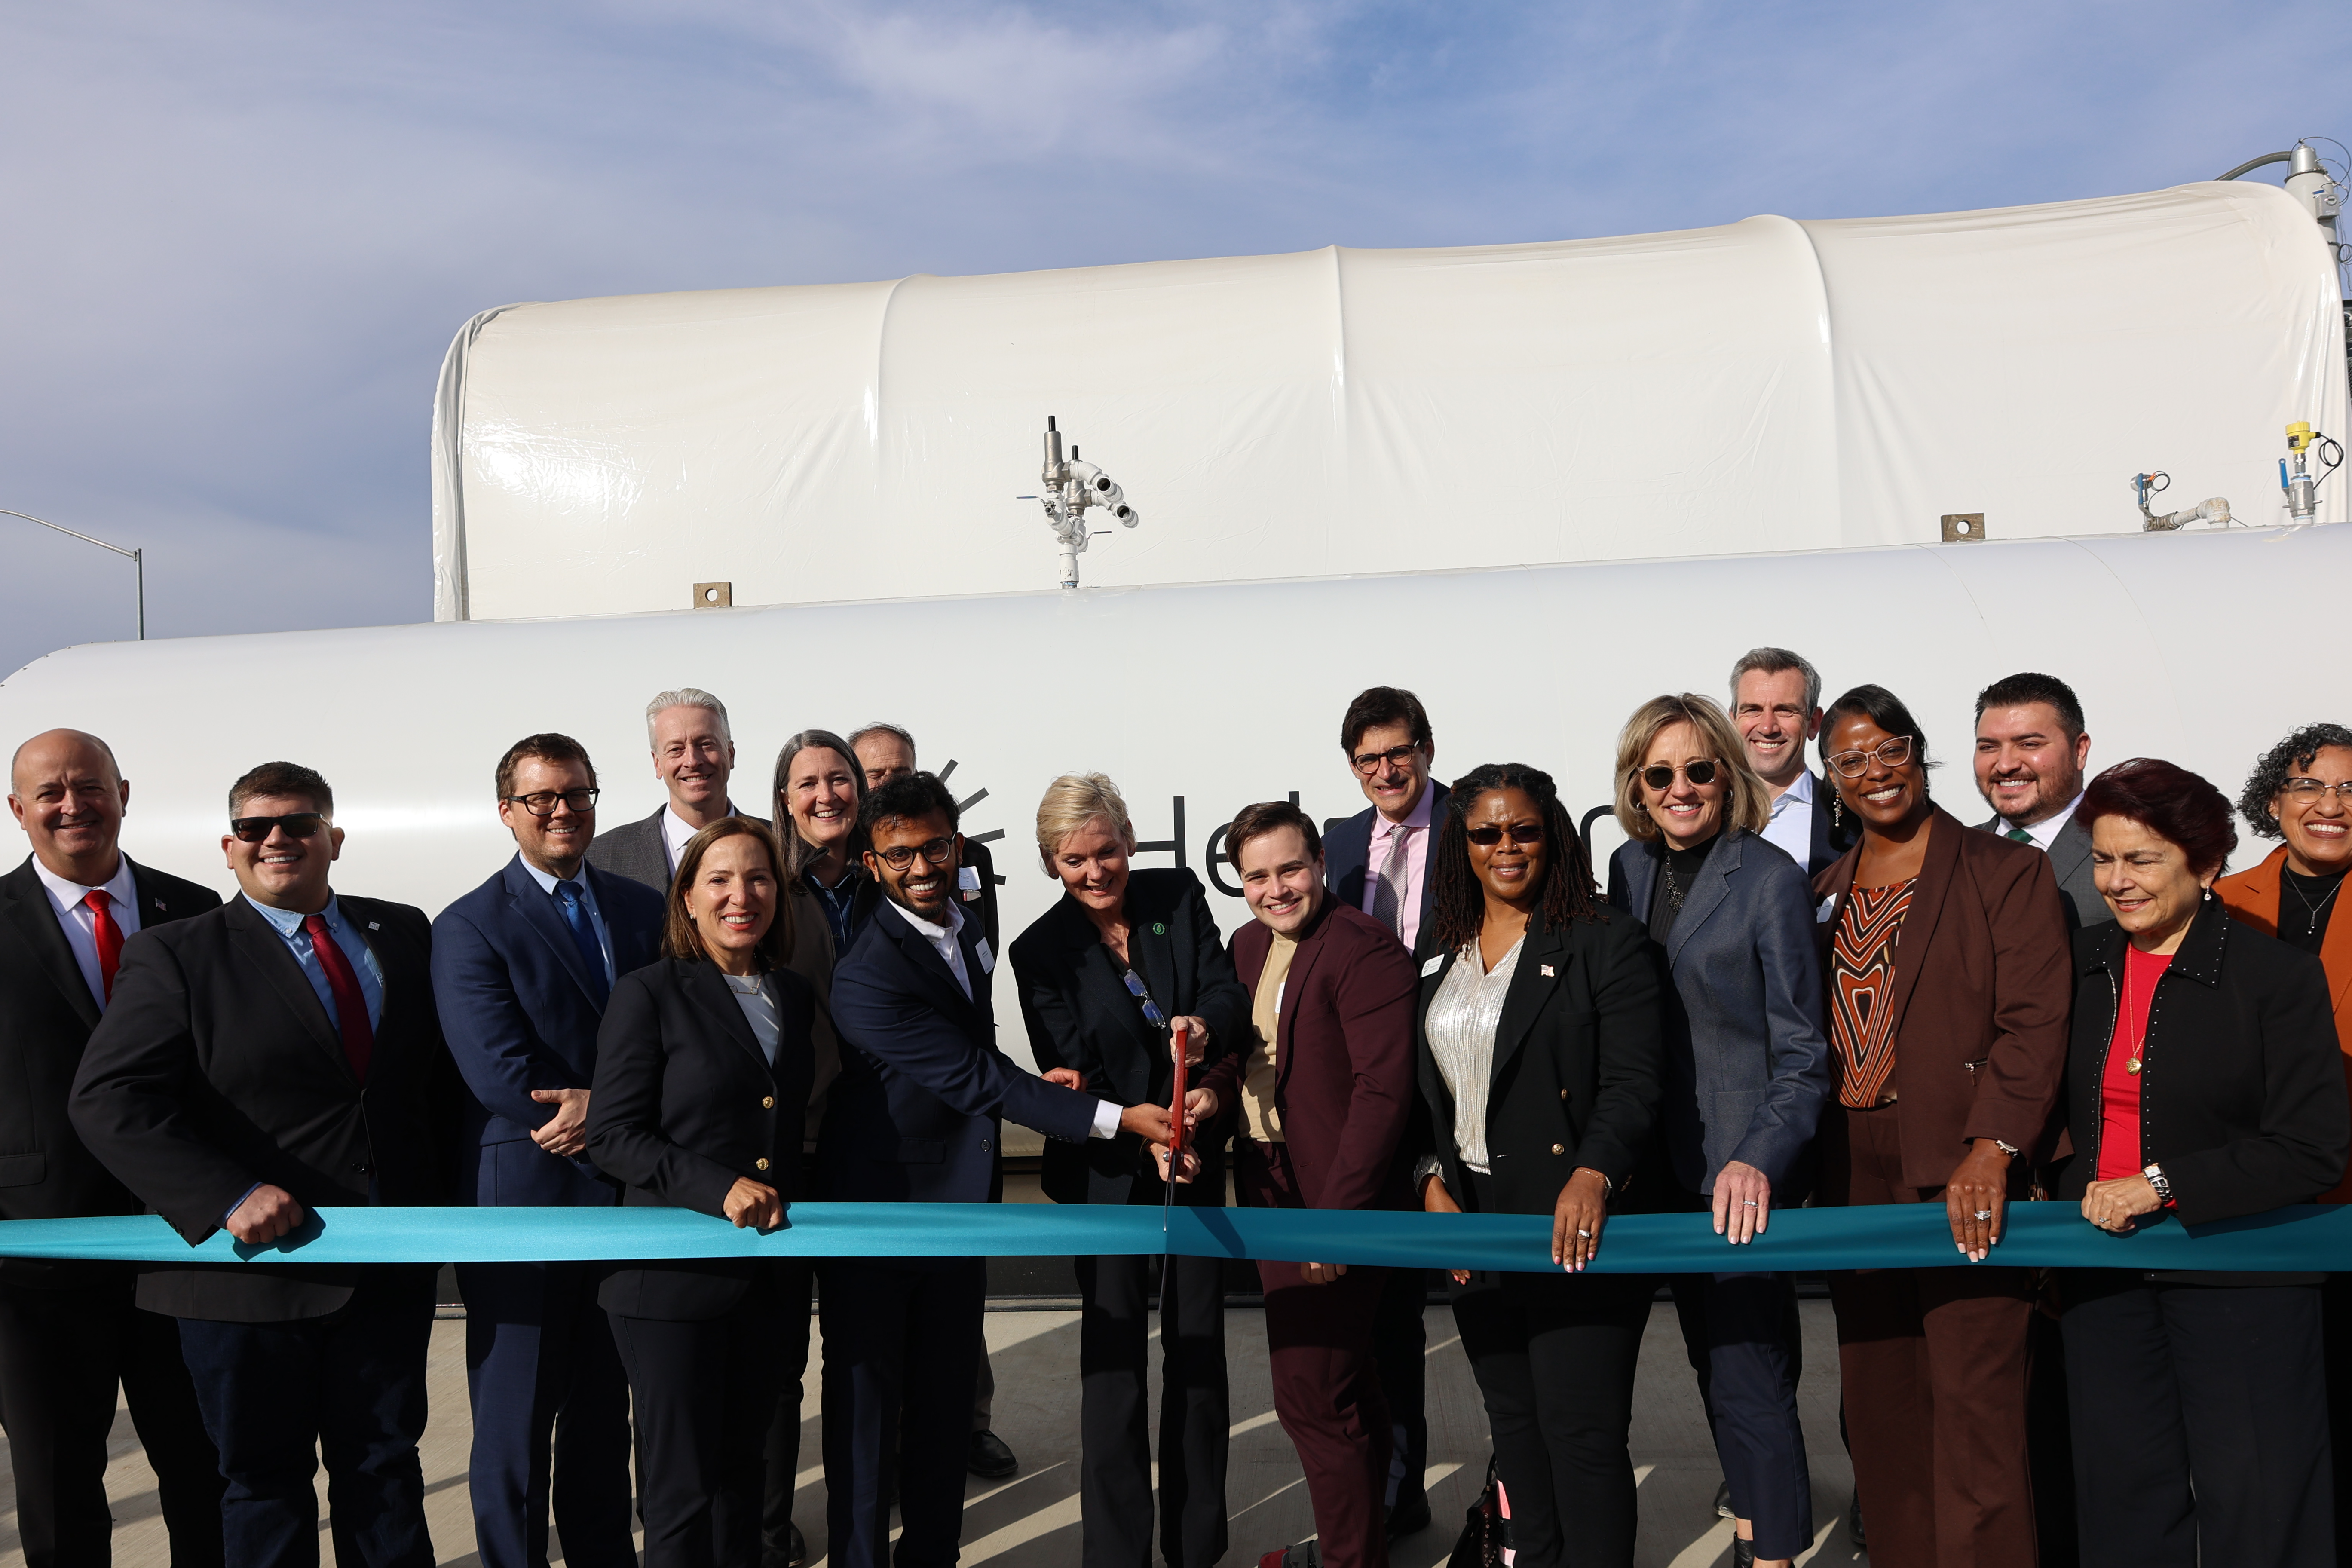 Image of officials and ribbon cutting ceremony